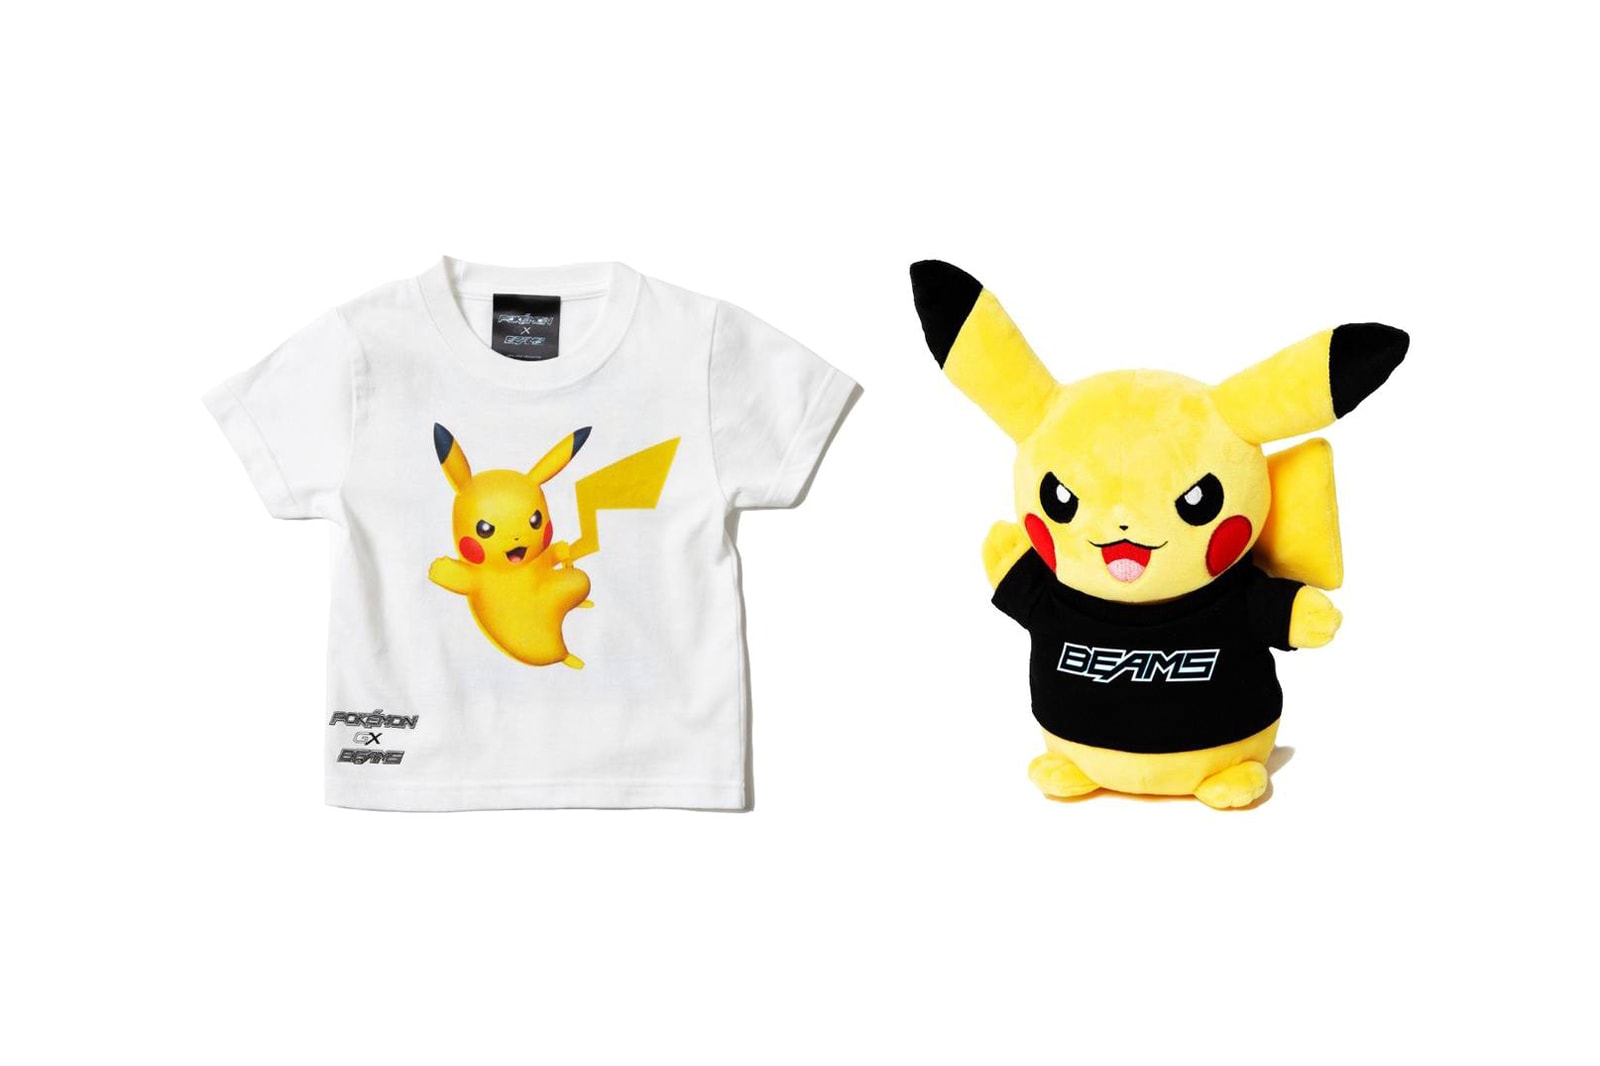 UNDERCOVER x Nike Daybreak Red BEAMS & Pokémon Trading Card Collaboration Pikachu Plushie Toy